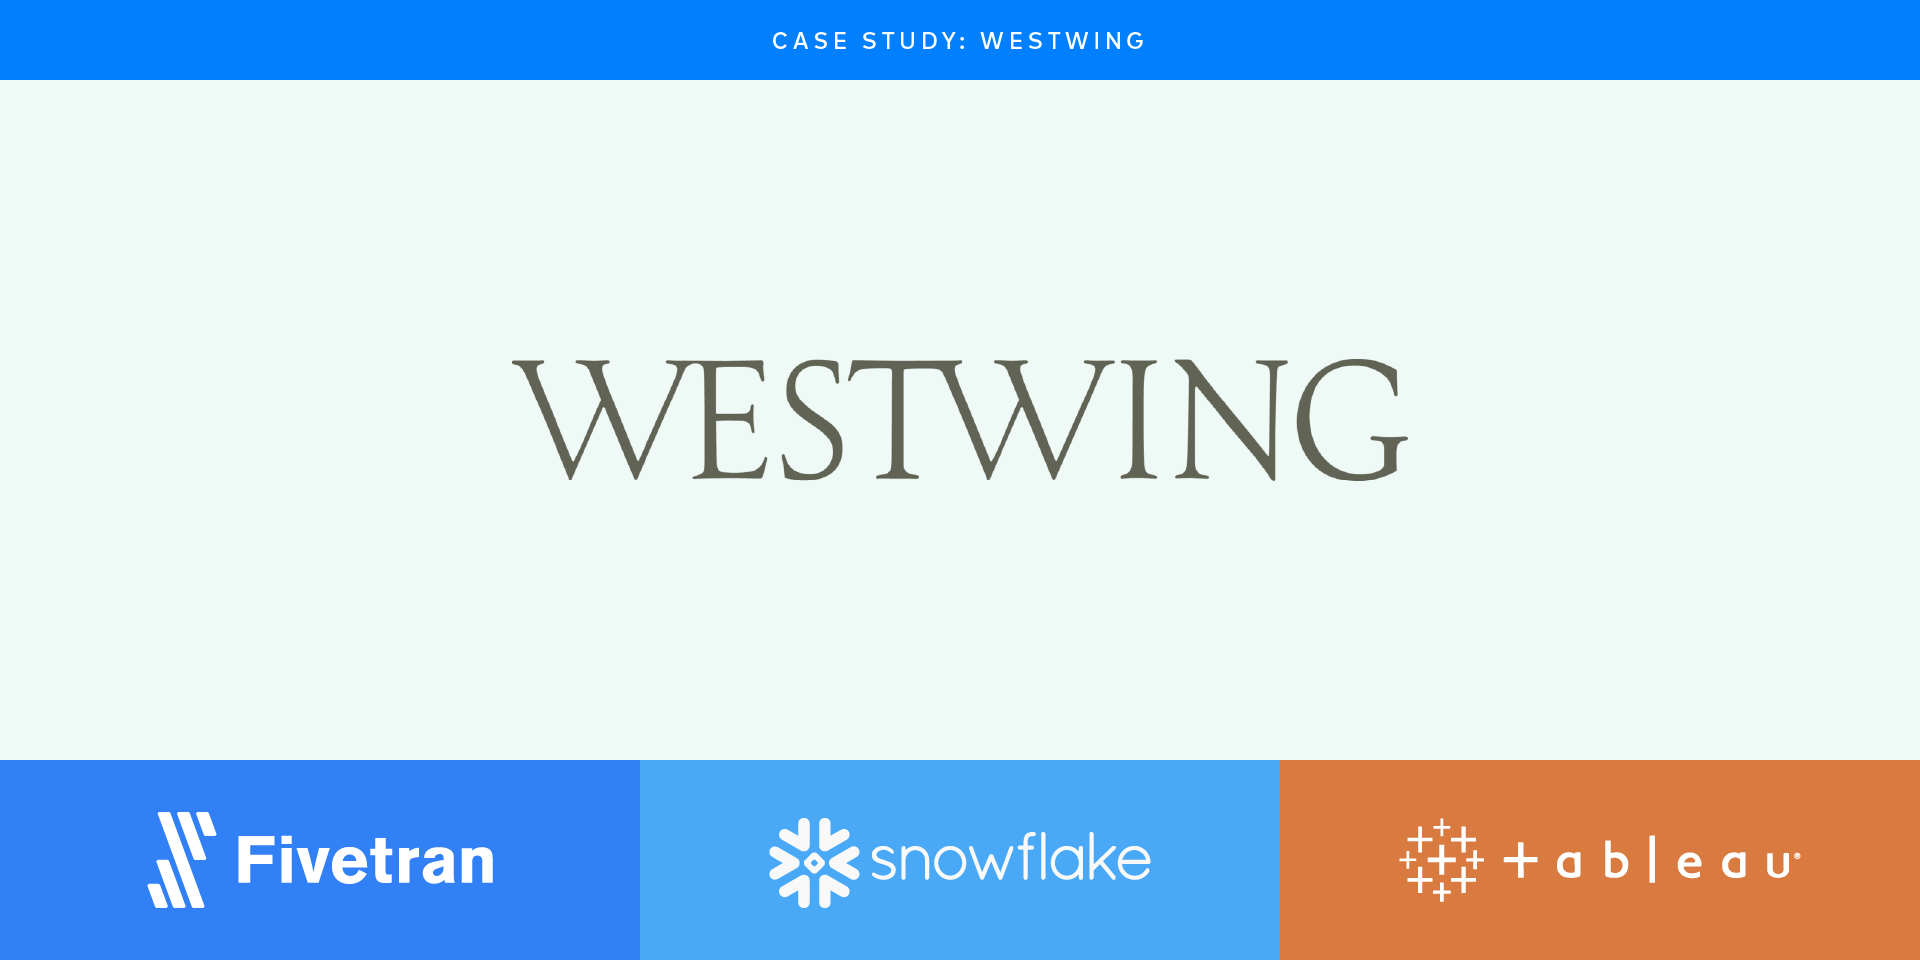 Westwing boosts marketing ROI with Fivetran